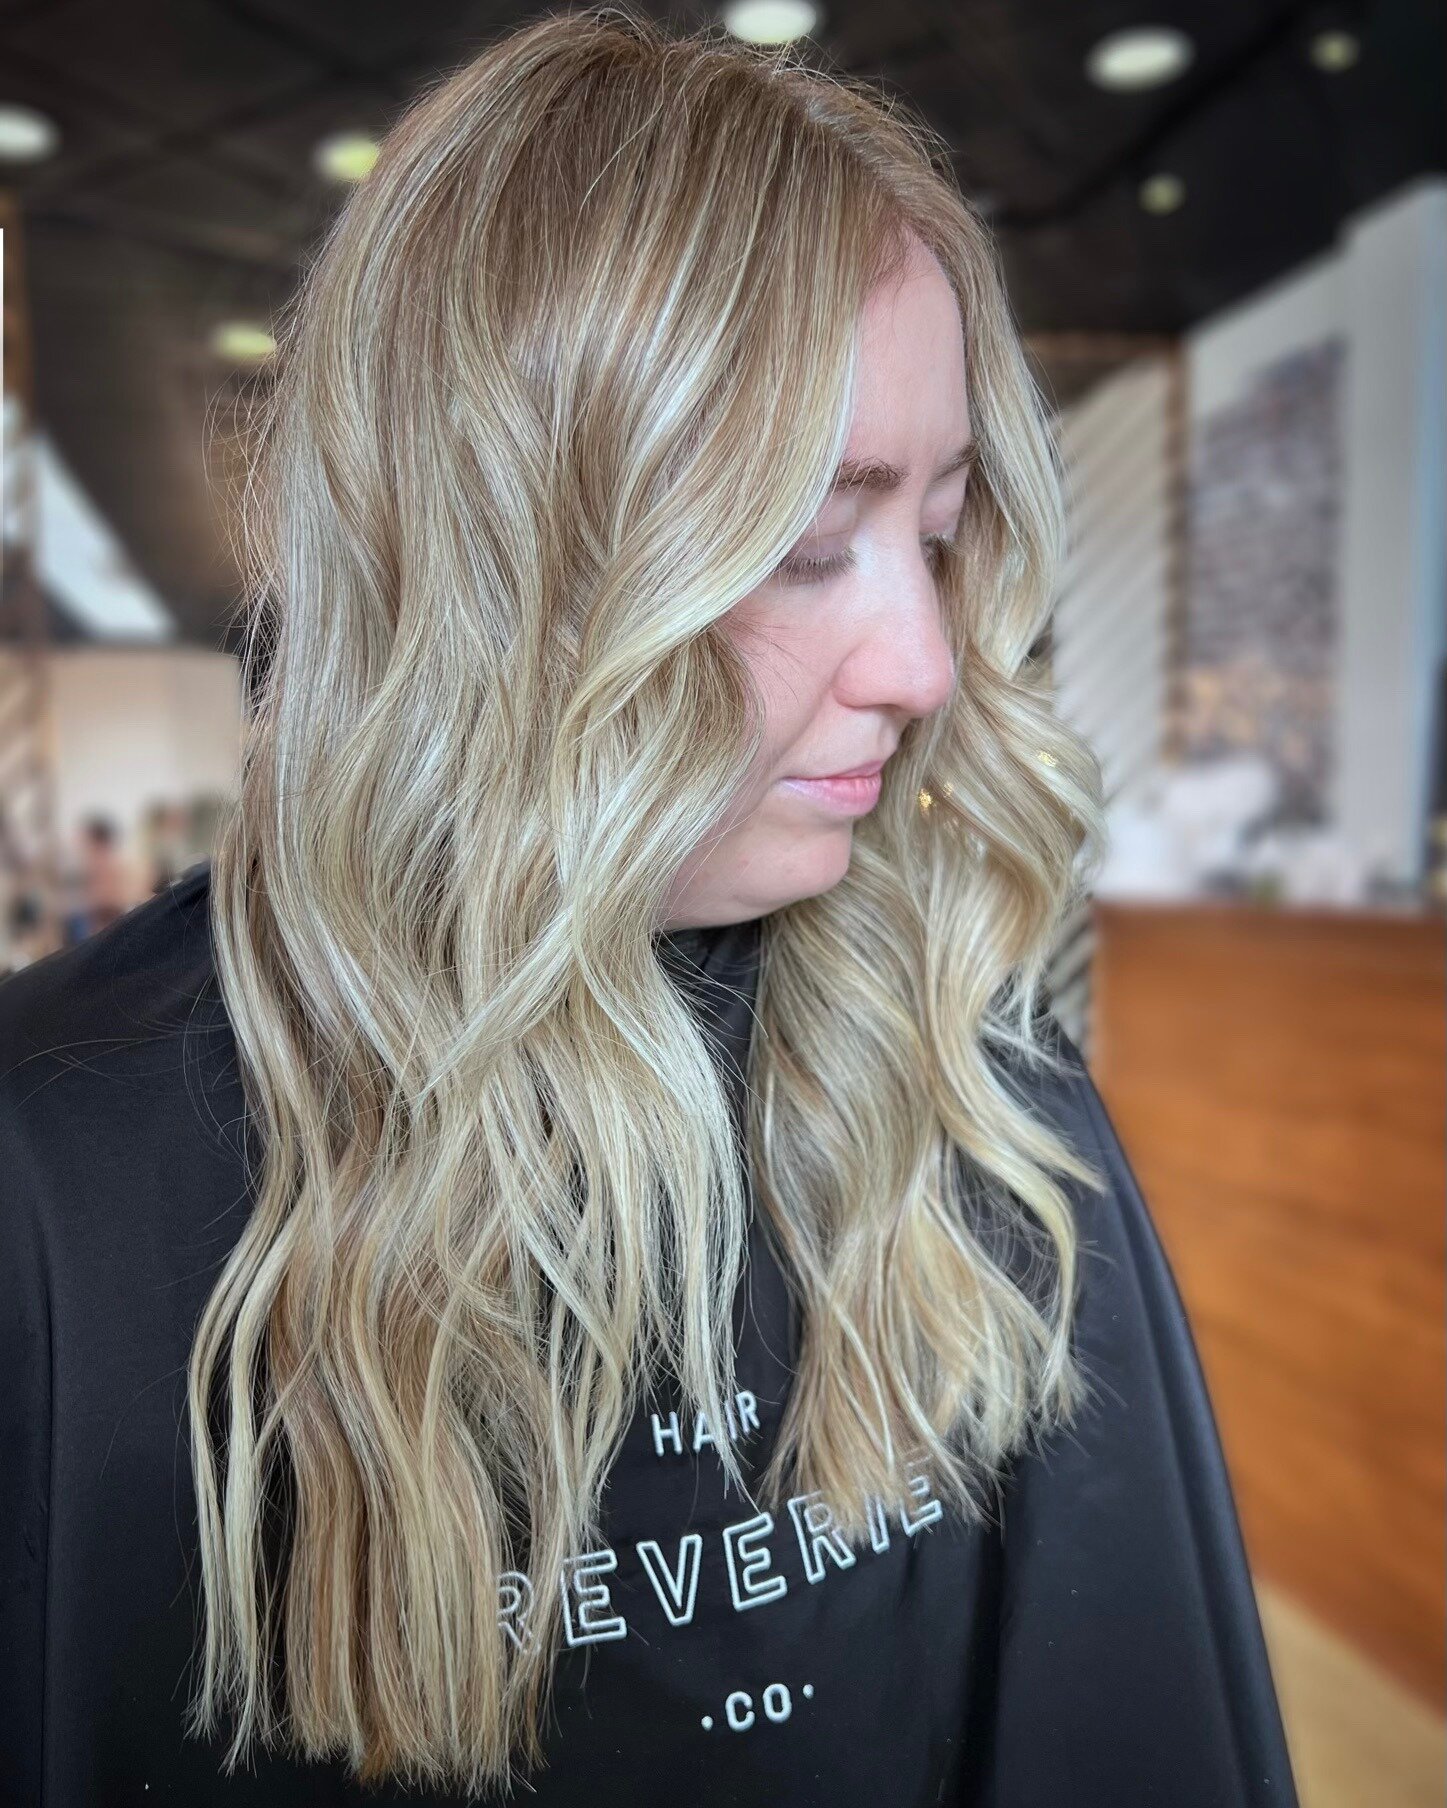 It's officially sun-kissed season 🌞

Lauren did a combo of foliyage + teasylights to craft this perfect lived in golden blonde 🍯 then she added some soft face framing layers to really set it off ⚡️

If you're ready to mix things up but keep your lo